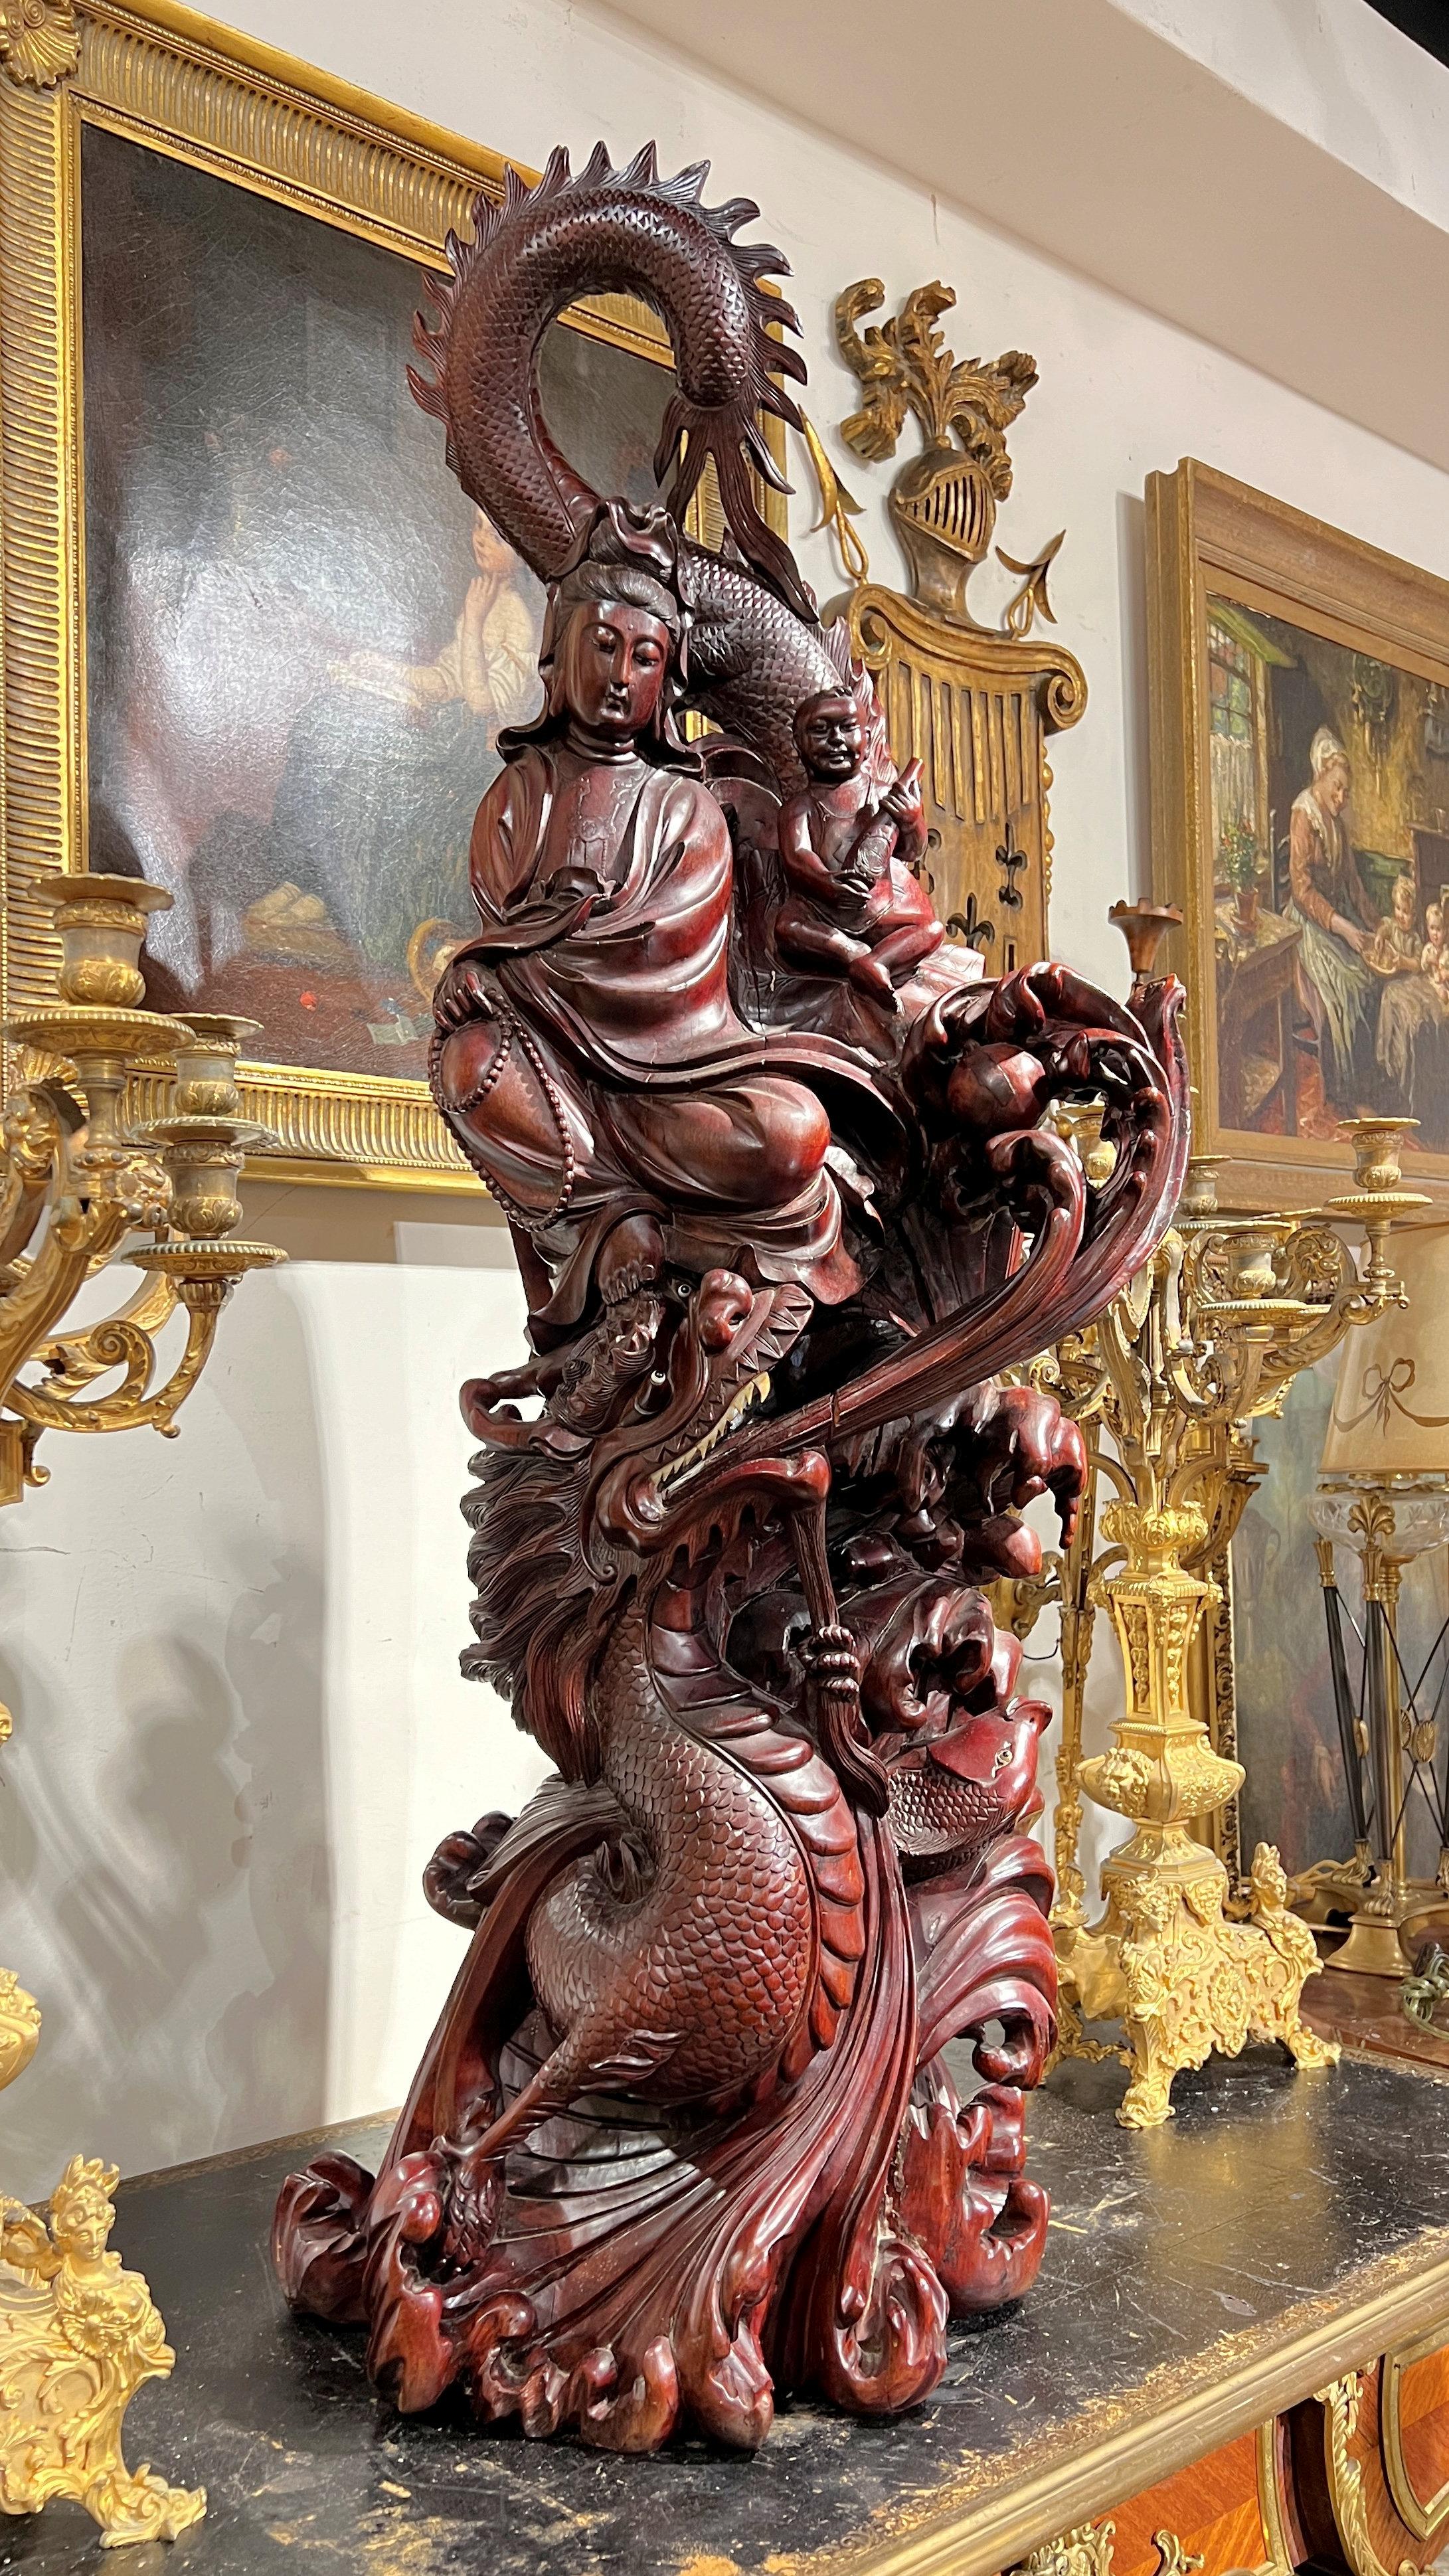 Monumental, vintage sculpture in carved rosewood of Quan Yin (Guanyin) measuring 50.5 by by 22 by 14 inches, depicting the Buddhist goddess of mercy and compassion, draped with a fierce dragon, the symbolic of wisdom, strength and wisdom, with a